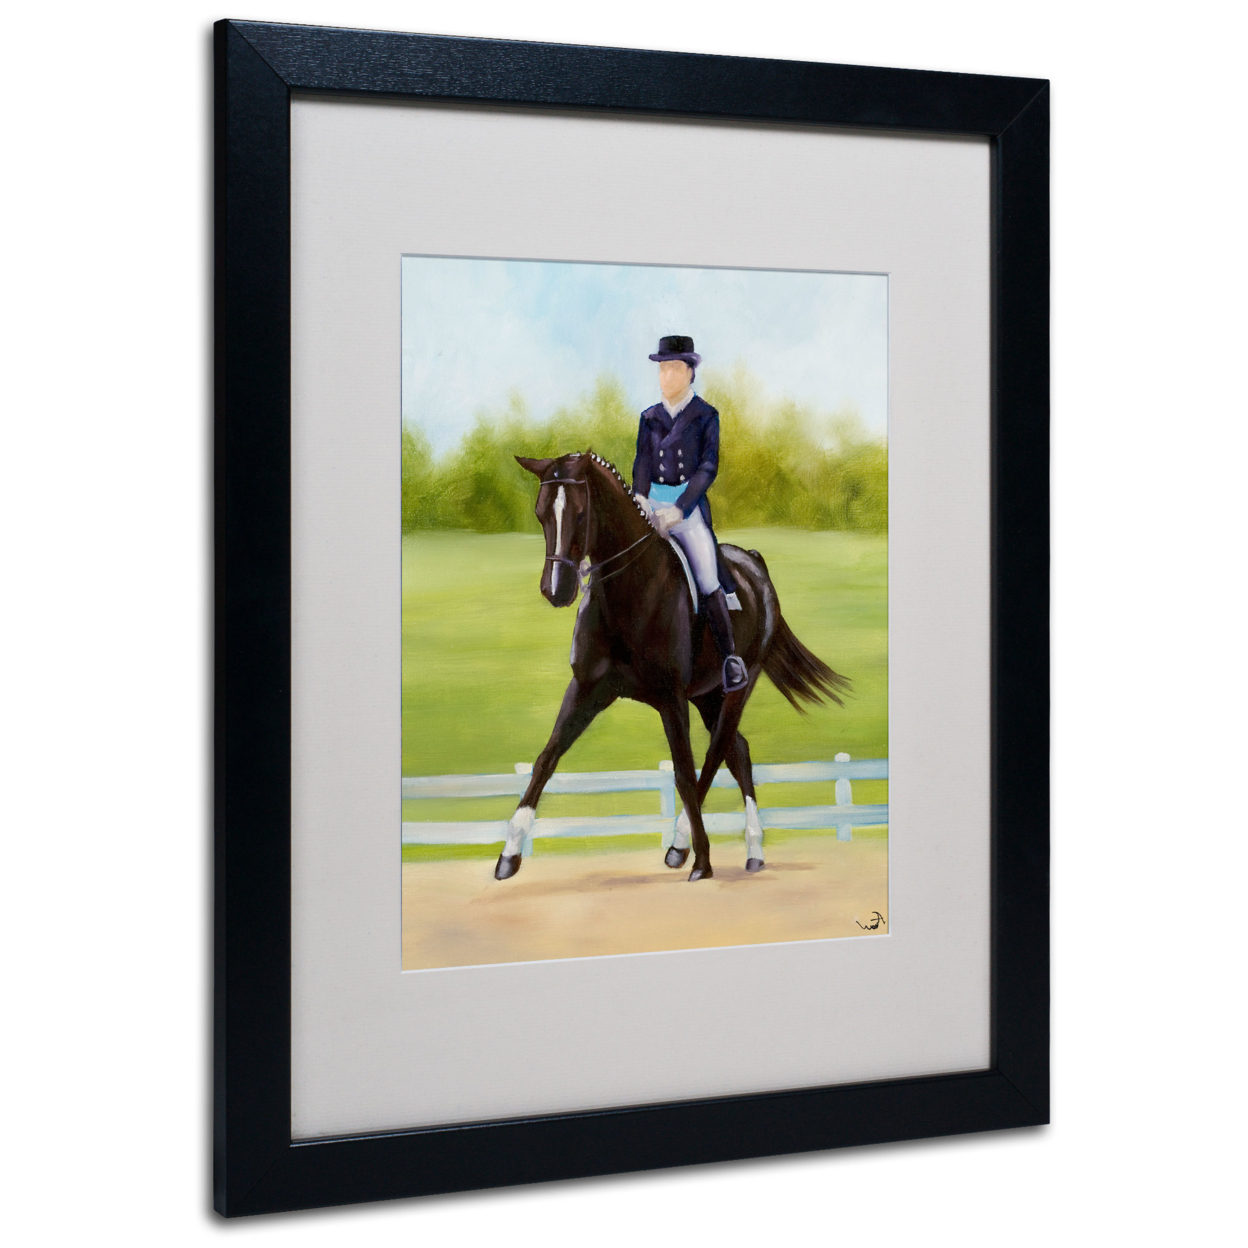 Michelle Moate 'Horse Of Sport IX' Black Wooden Framed Art 18 X 22 Inches